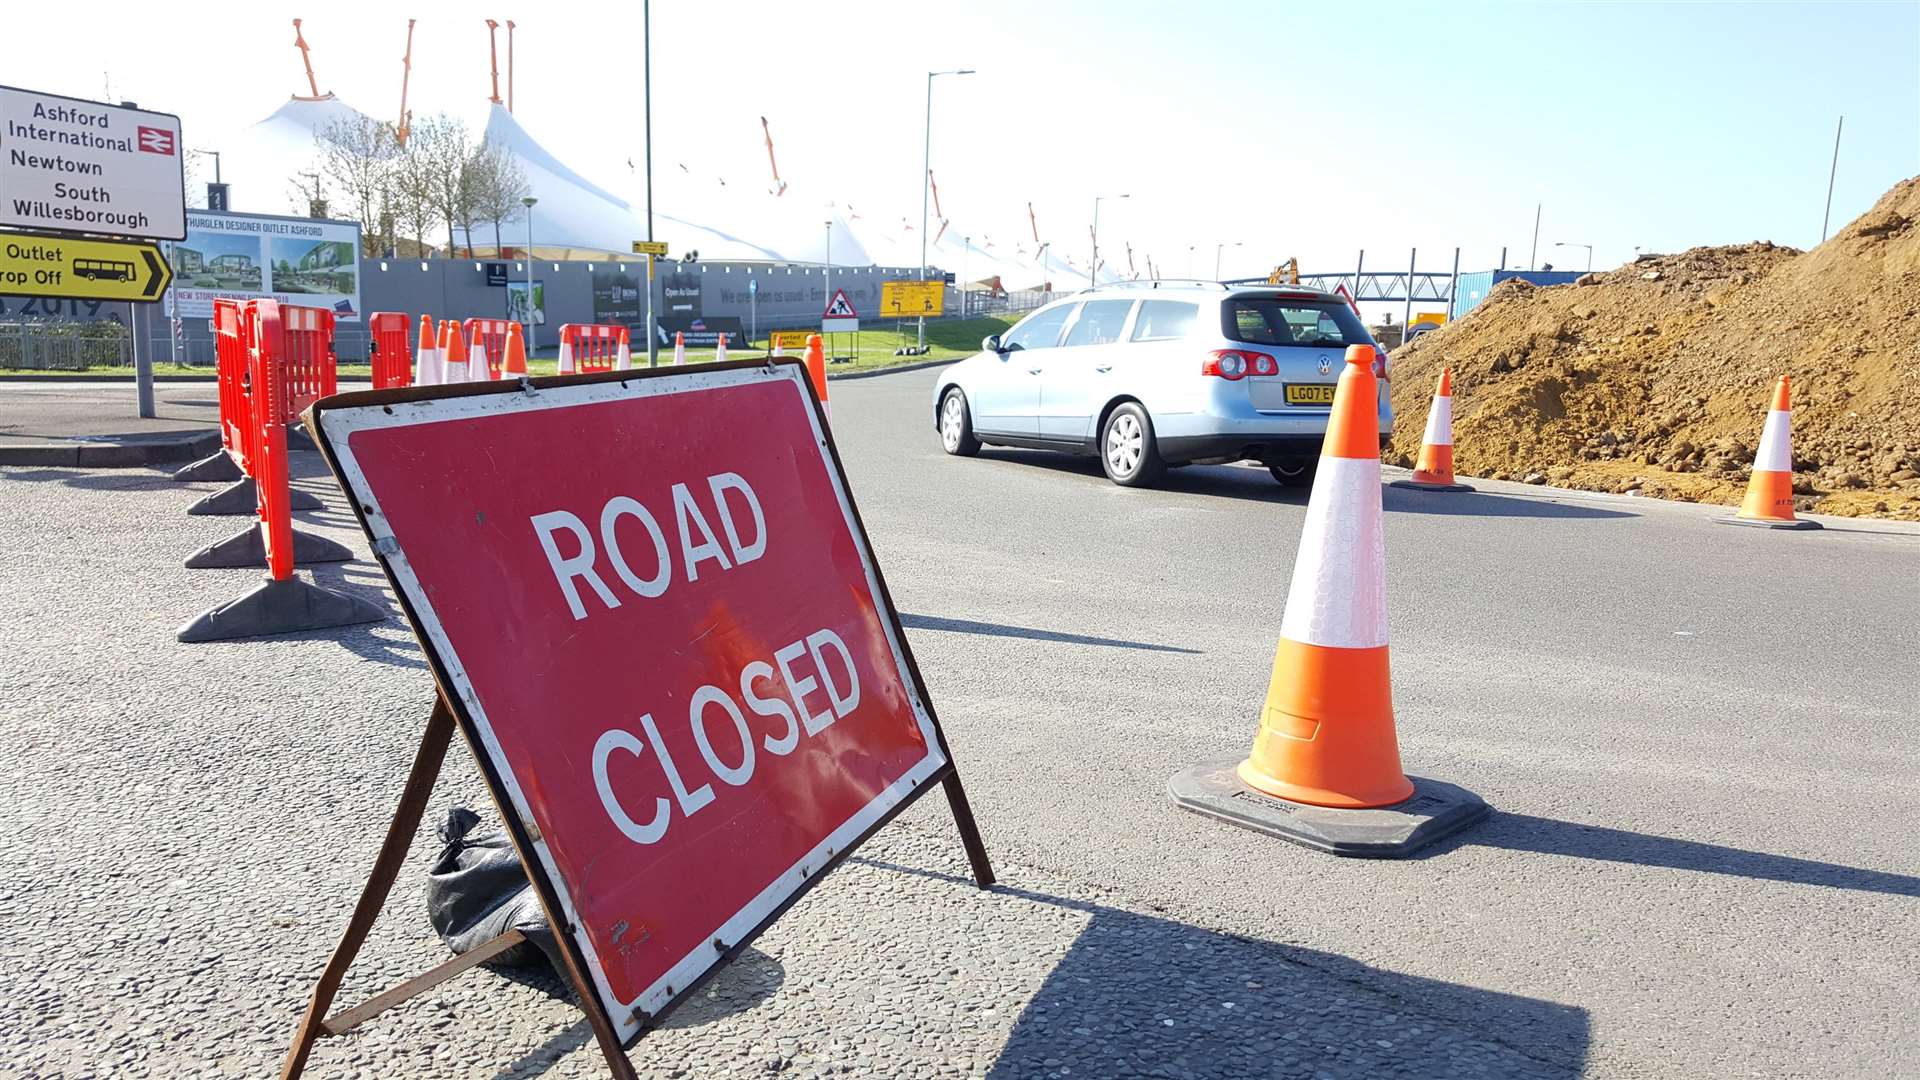 The busy road will be closed for months